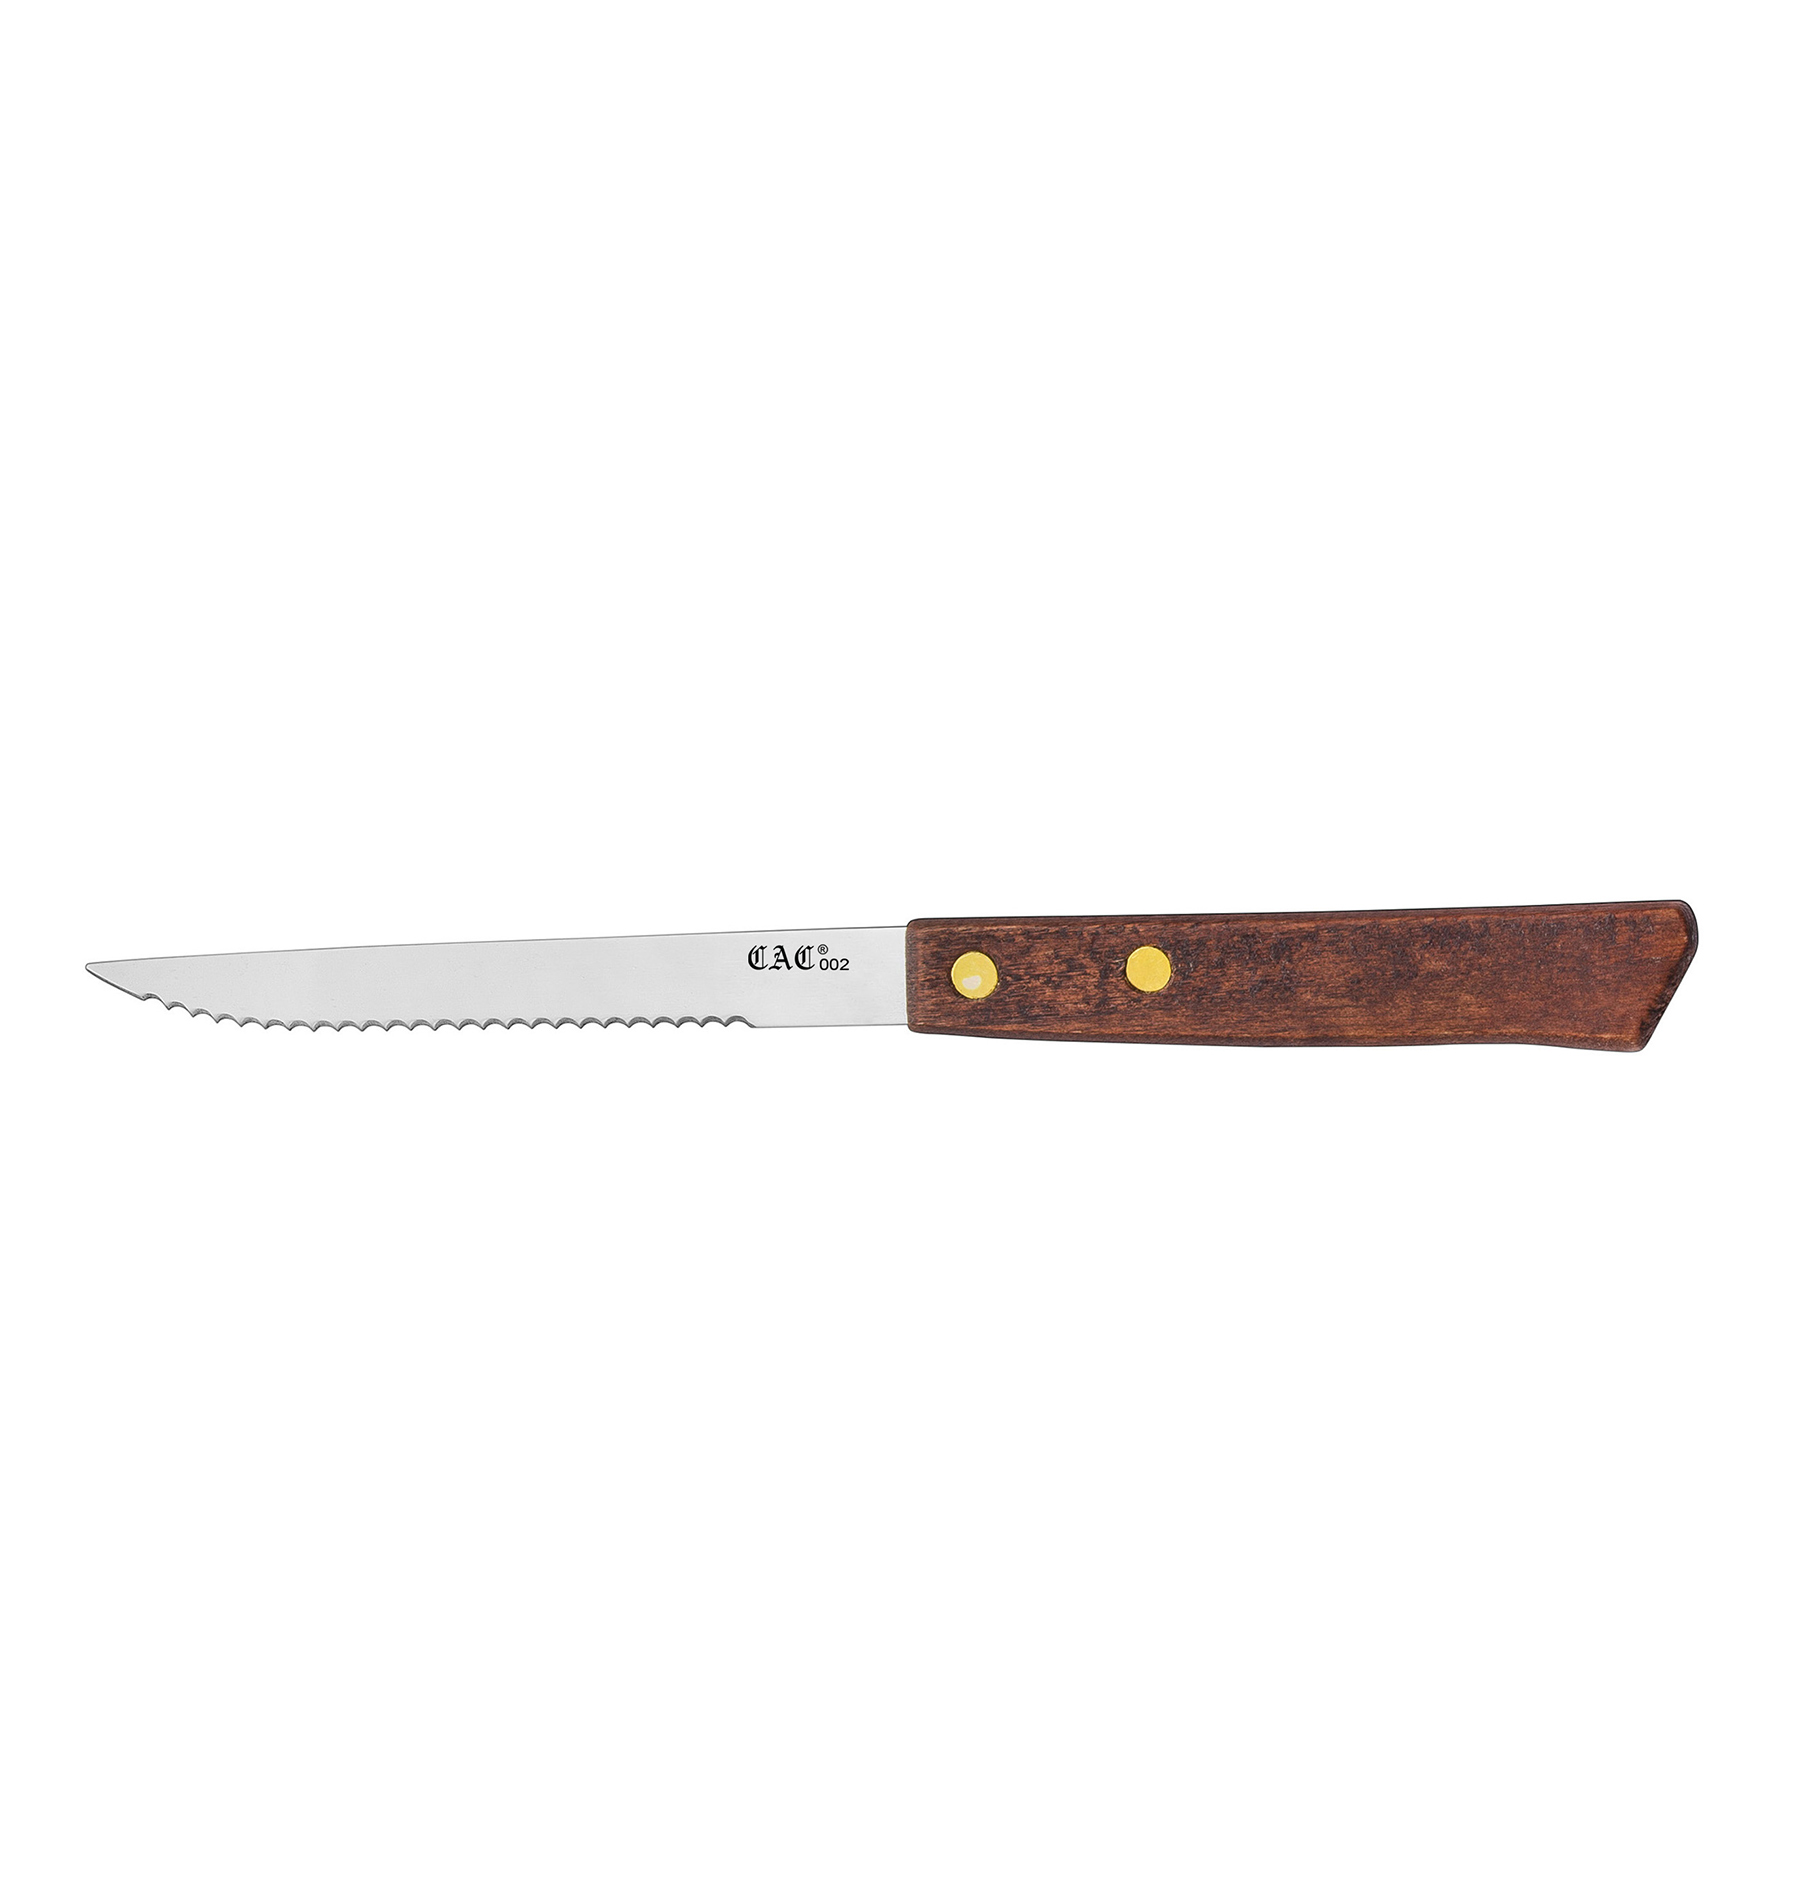 CAC China KWSK-40 Knife Steak with Pointed Tip, Wood Handle 4" - 1 dozen